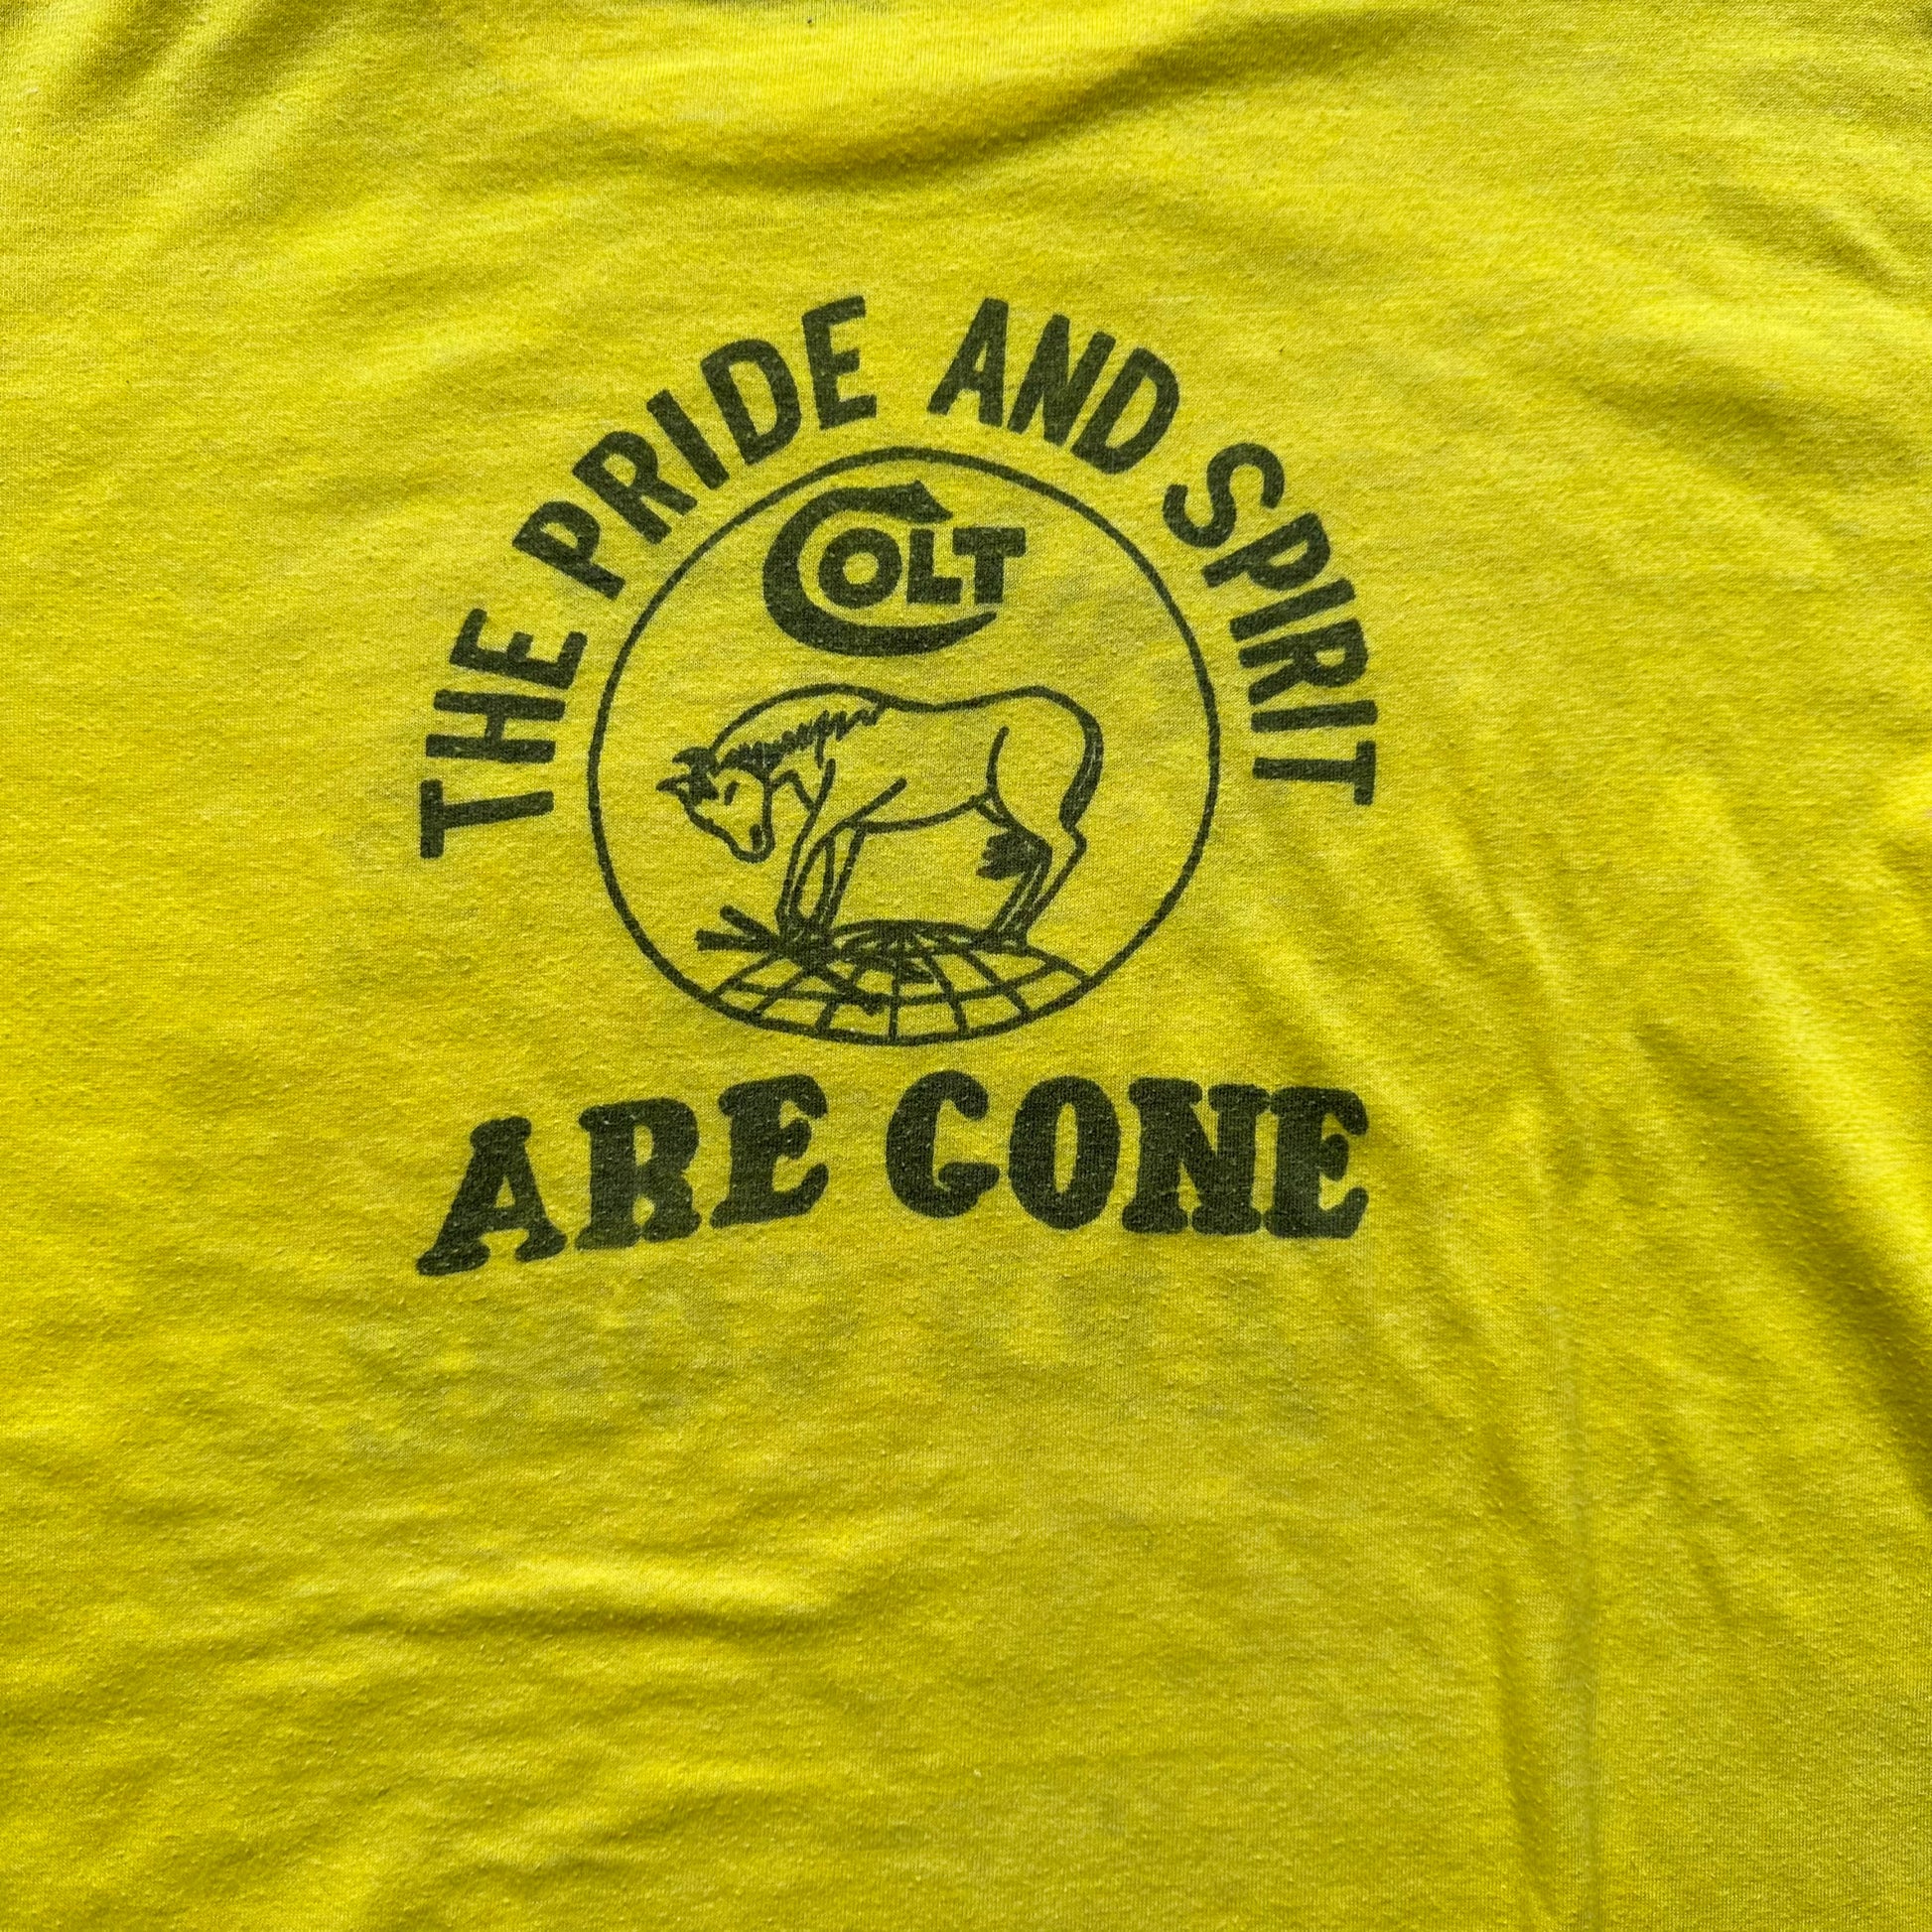 Rear Graphic Detail on Vintage Colt "The Pride and Spirit Are Gone" Tee SZ L | Vintage T-Shirts Seattle | Barn Owl Vintage Tees Seattle